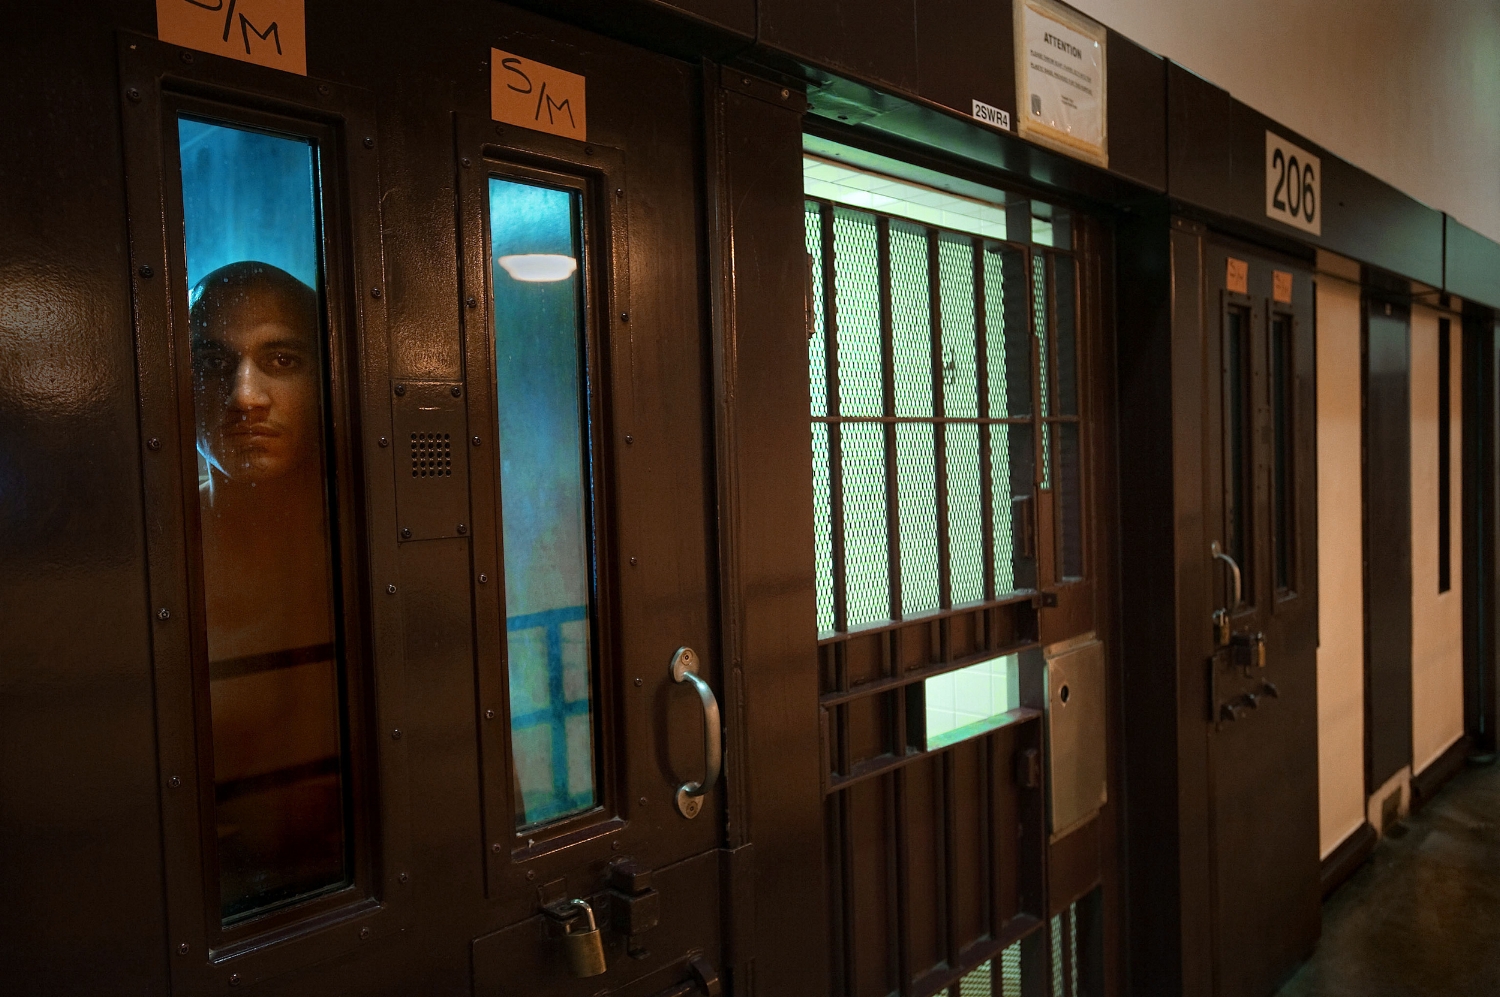  Prison inmate Joell Polanco, at left, peers from his cell in the behavior management unit at the Substance Abuse Treatment Facility in Corcoran on Thursday, March 25, 2010. 